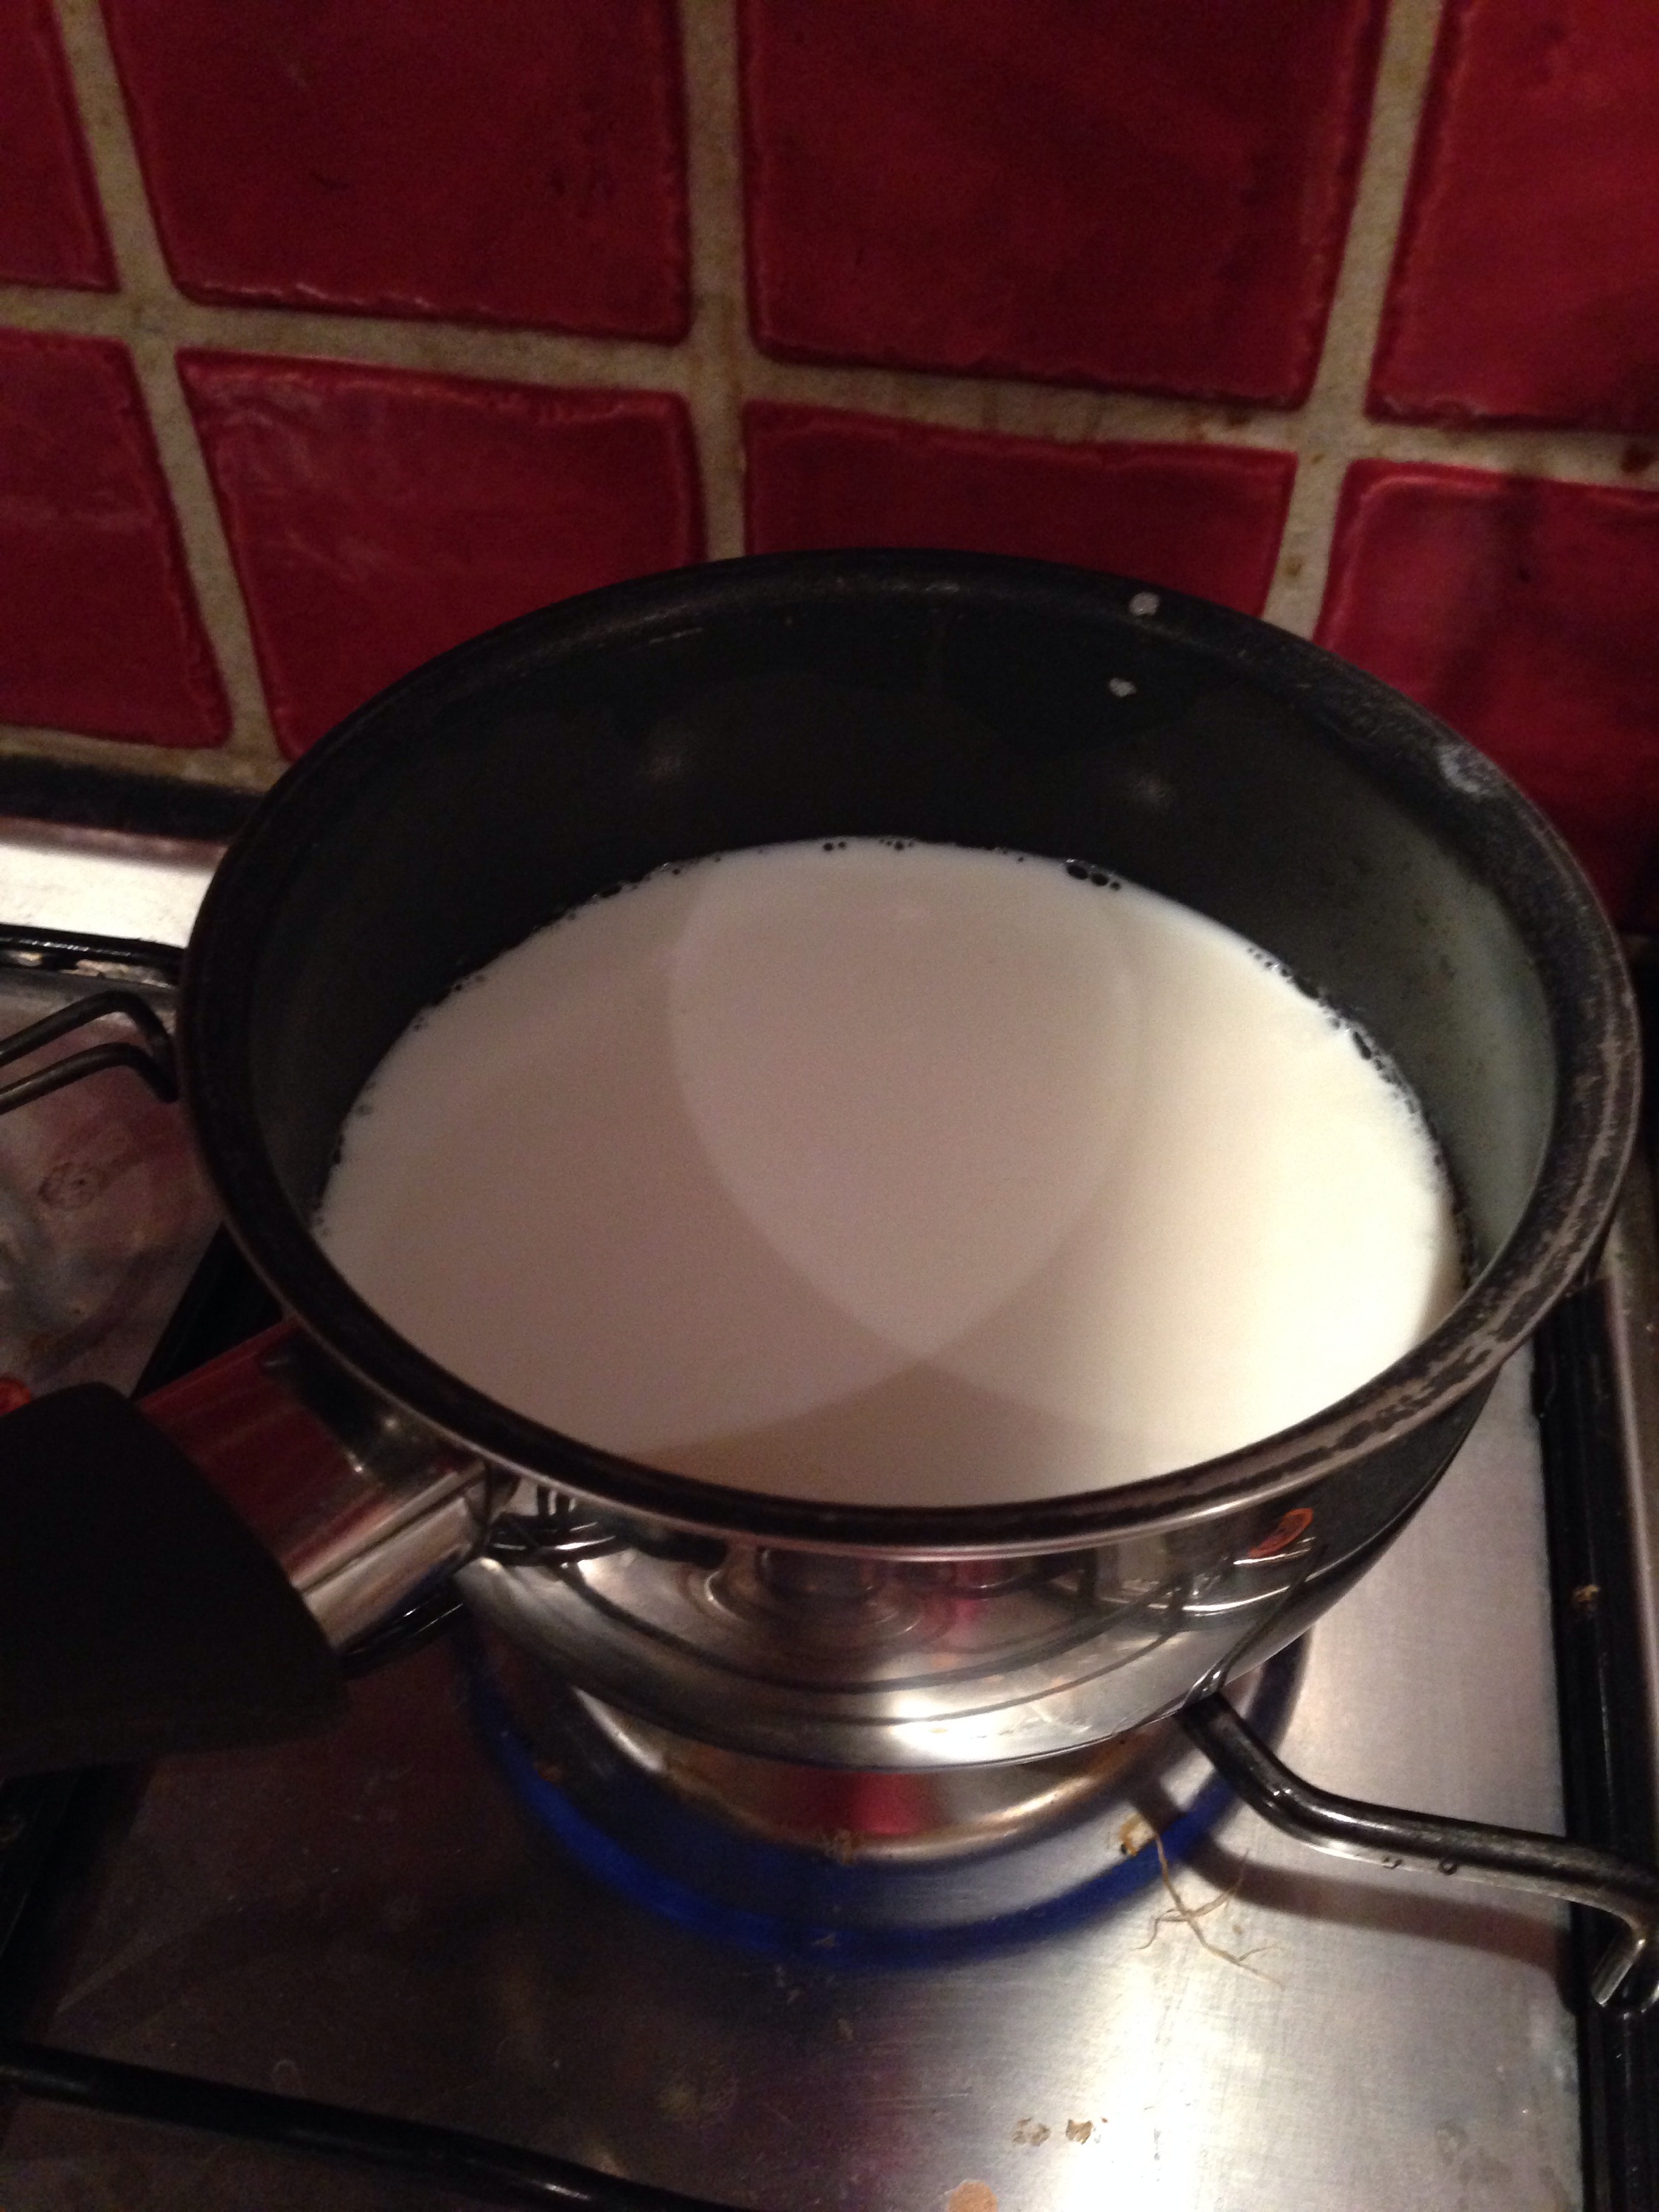 Warming milk for hot chocolate